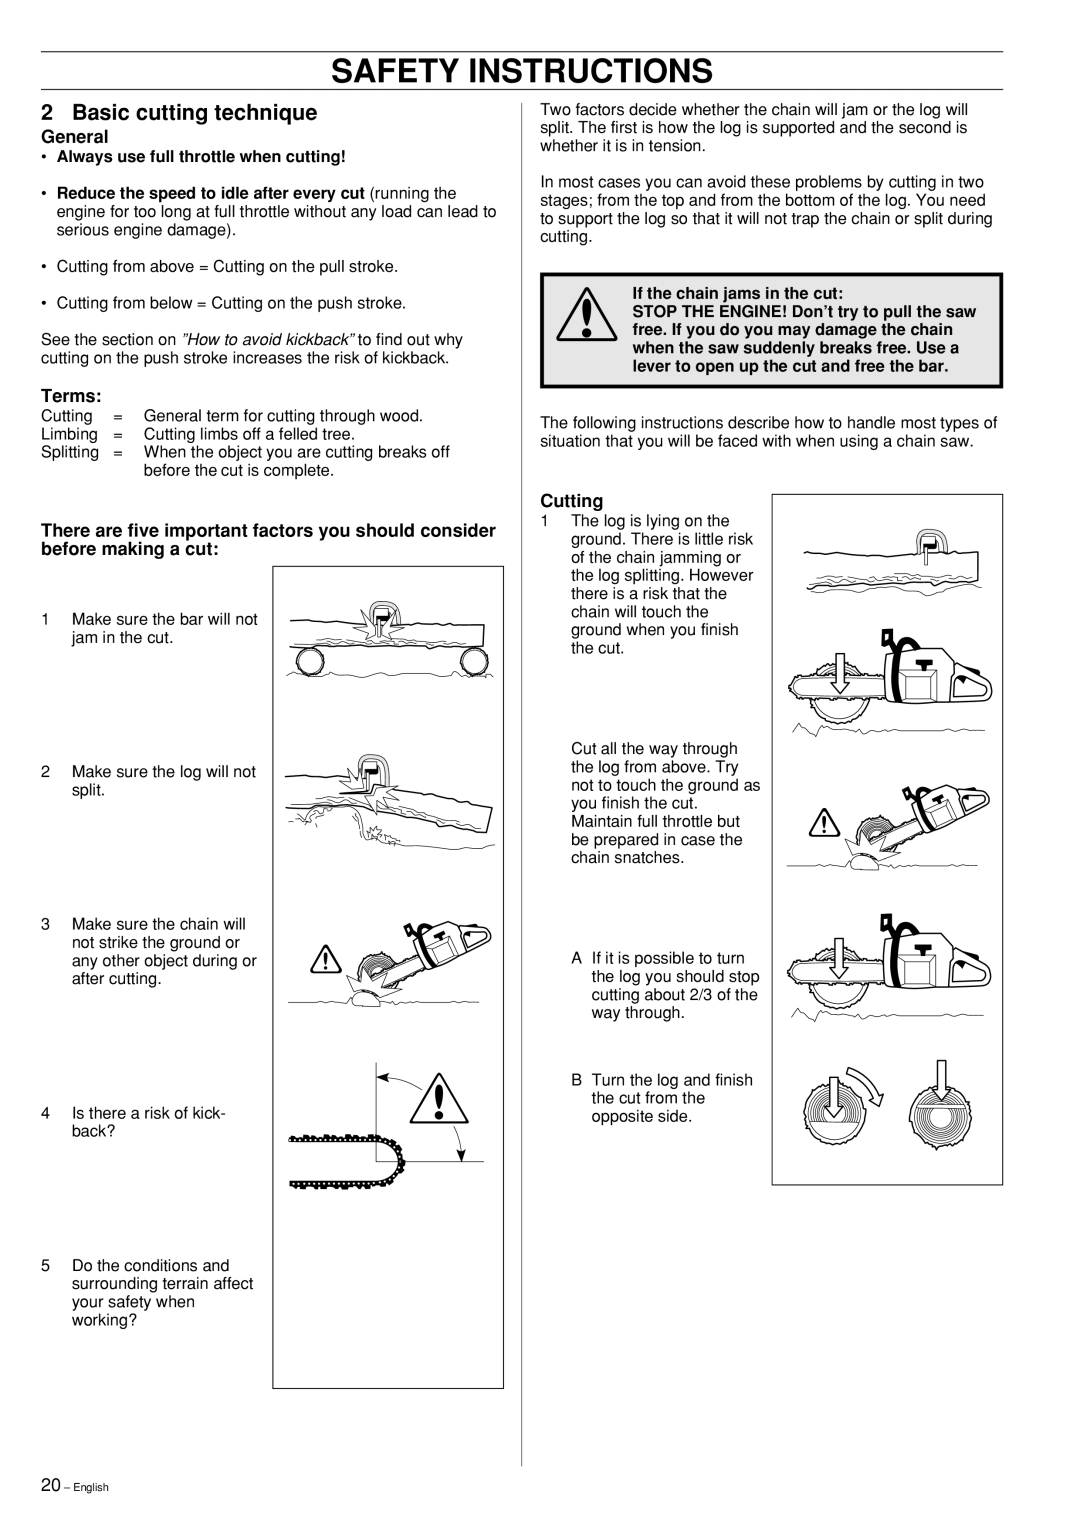 Husqvarna 55 Rancher Safety Instructions, Basic cutting technique, General, Terms, Cutting, If the chain jams in the cut 